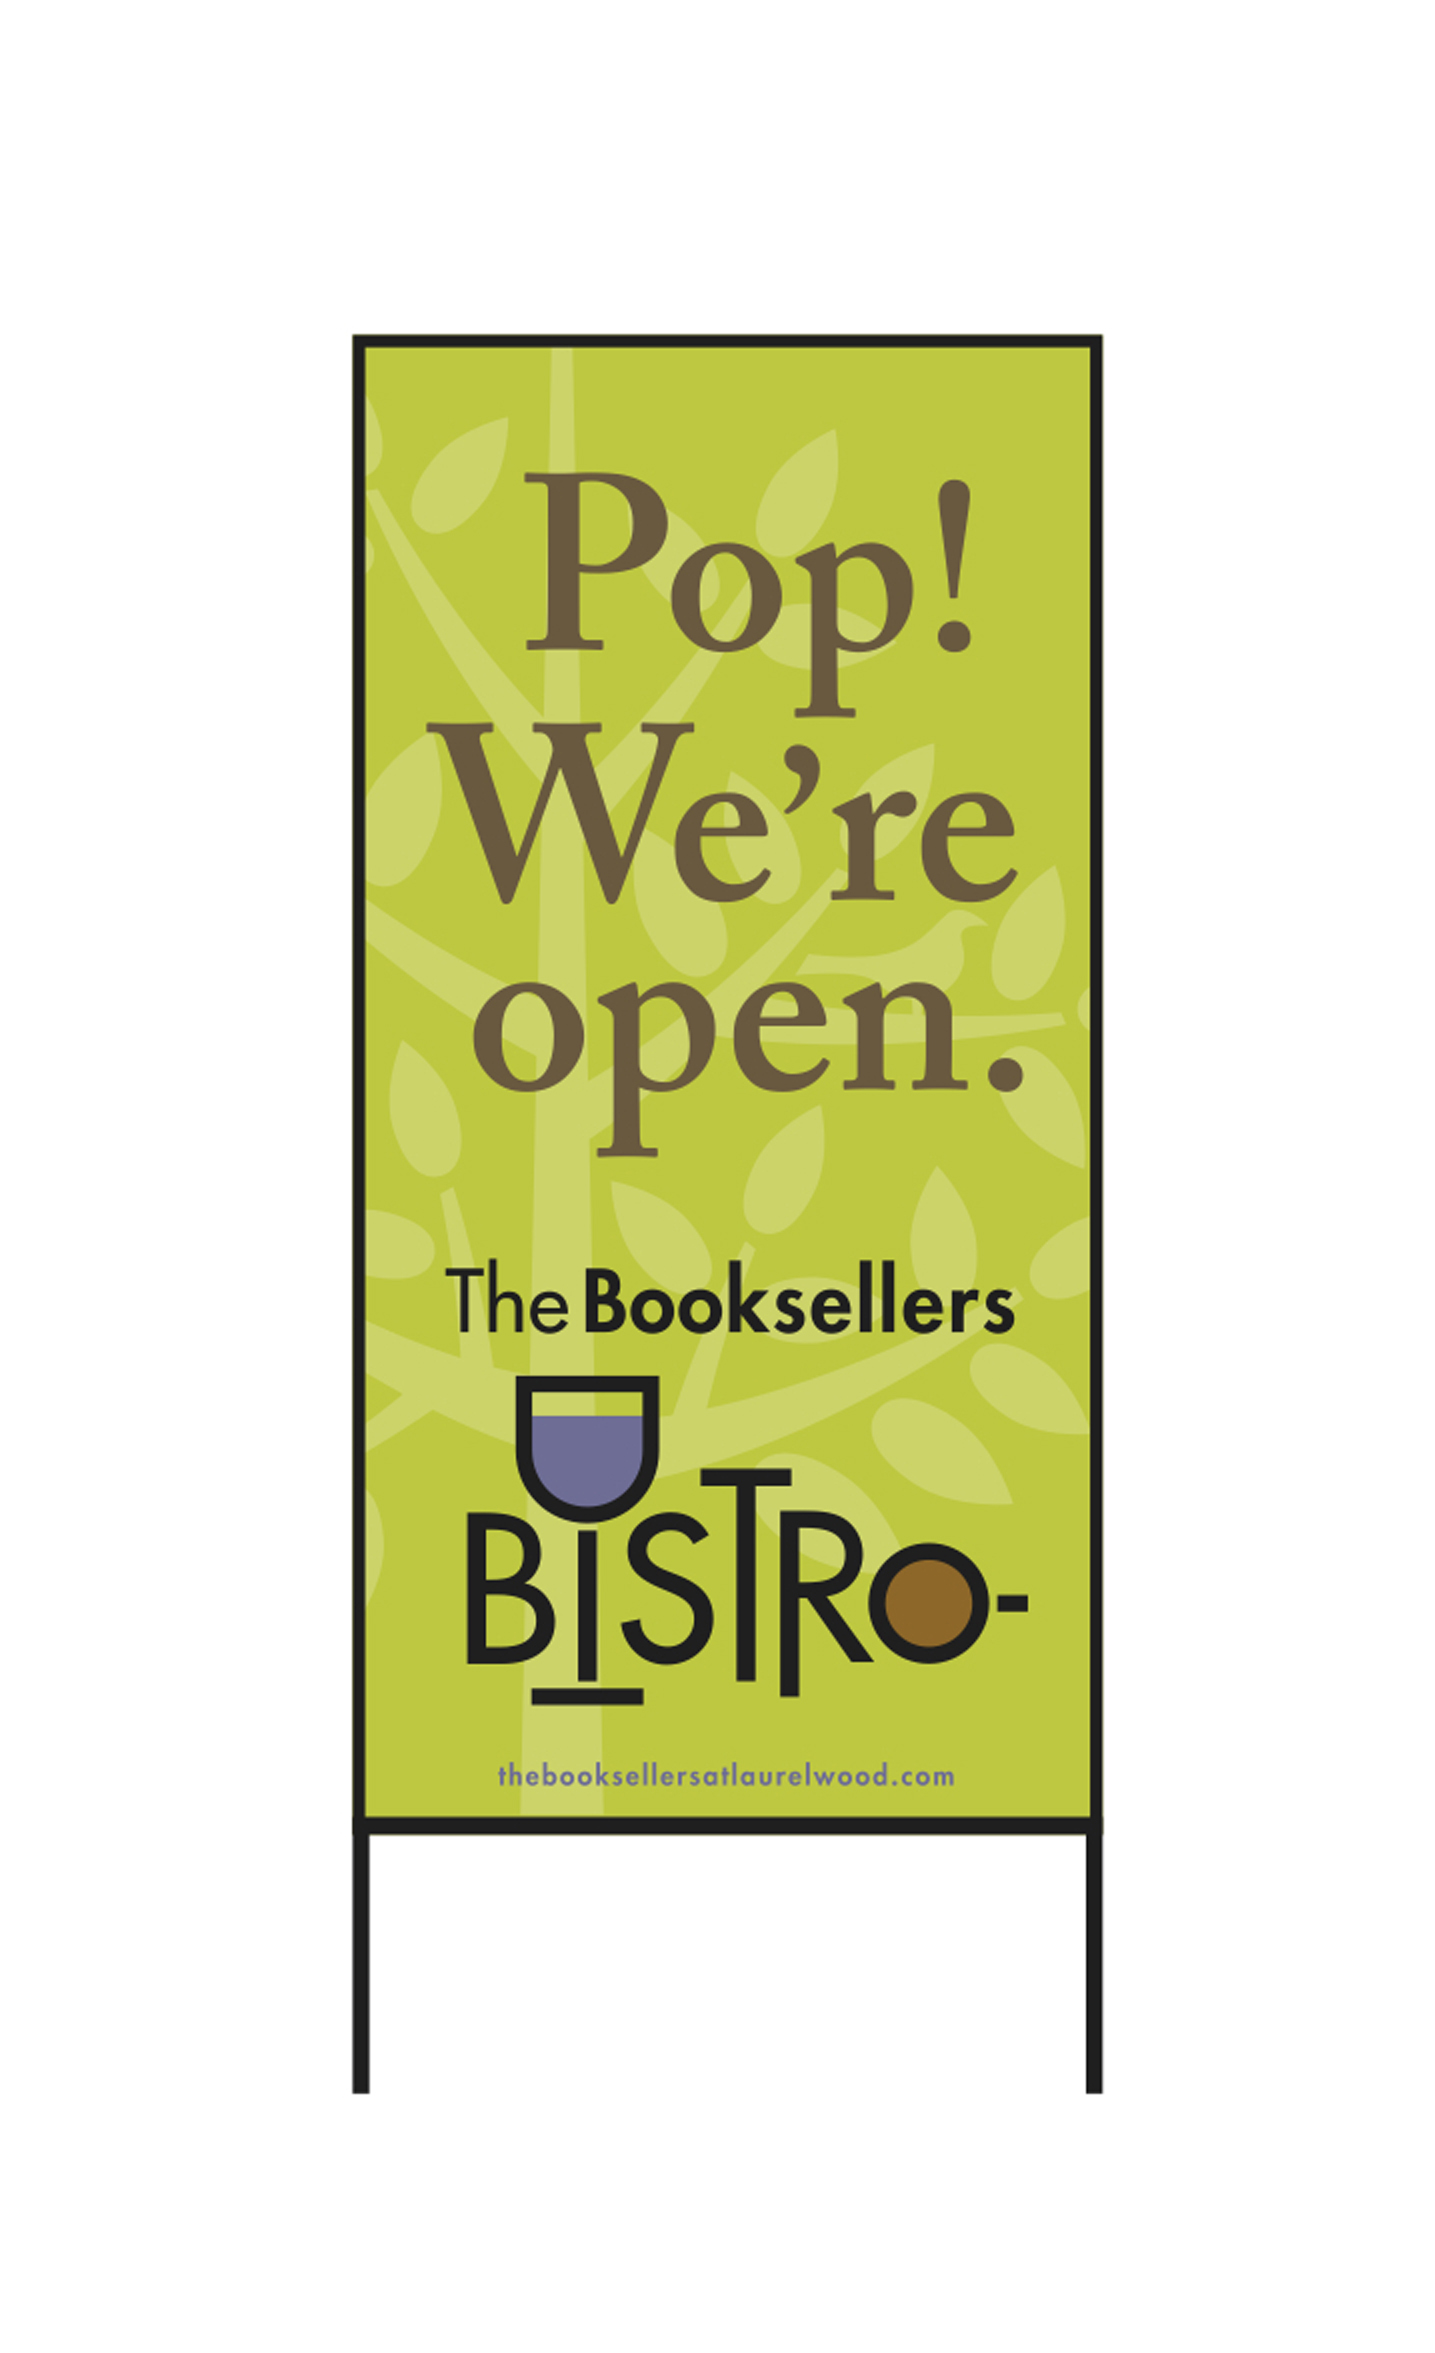  The Booksellers Bistro exterior banner/sign  Creative and design by Chuck Mitchell  Laurelwood Center Memphis, Tennessee 